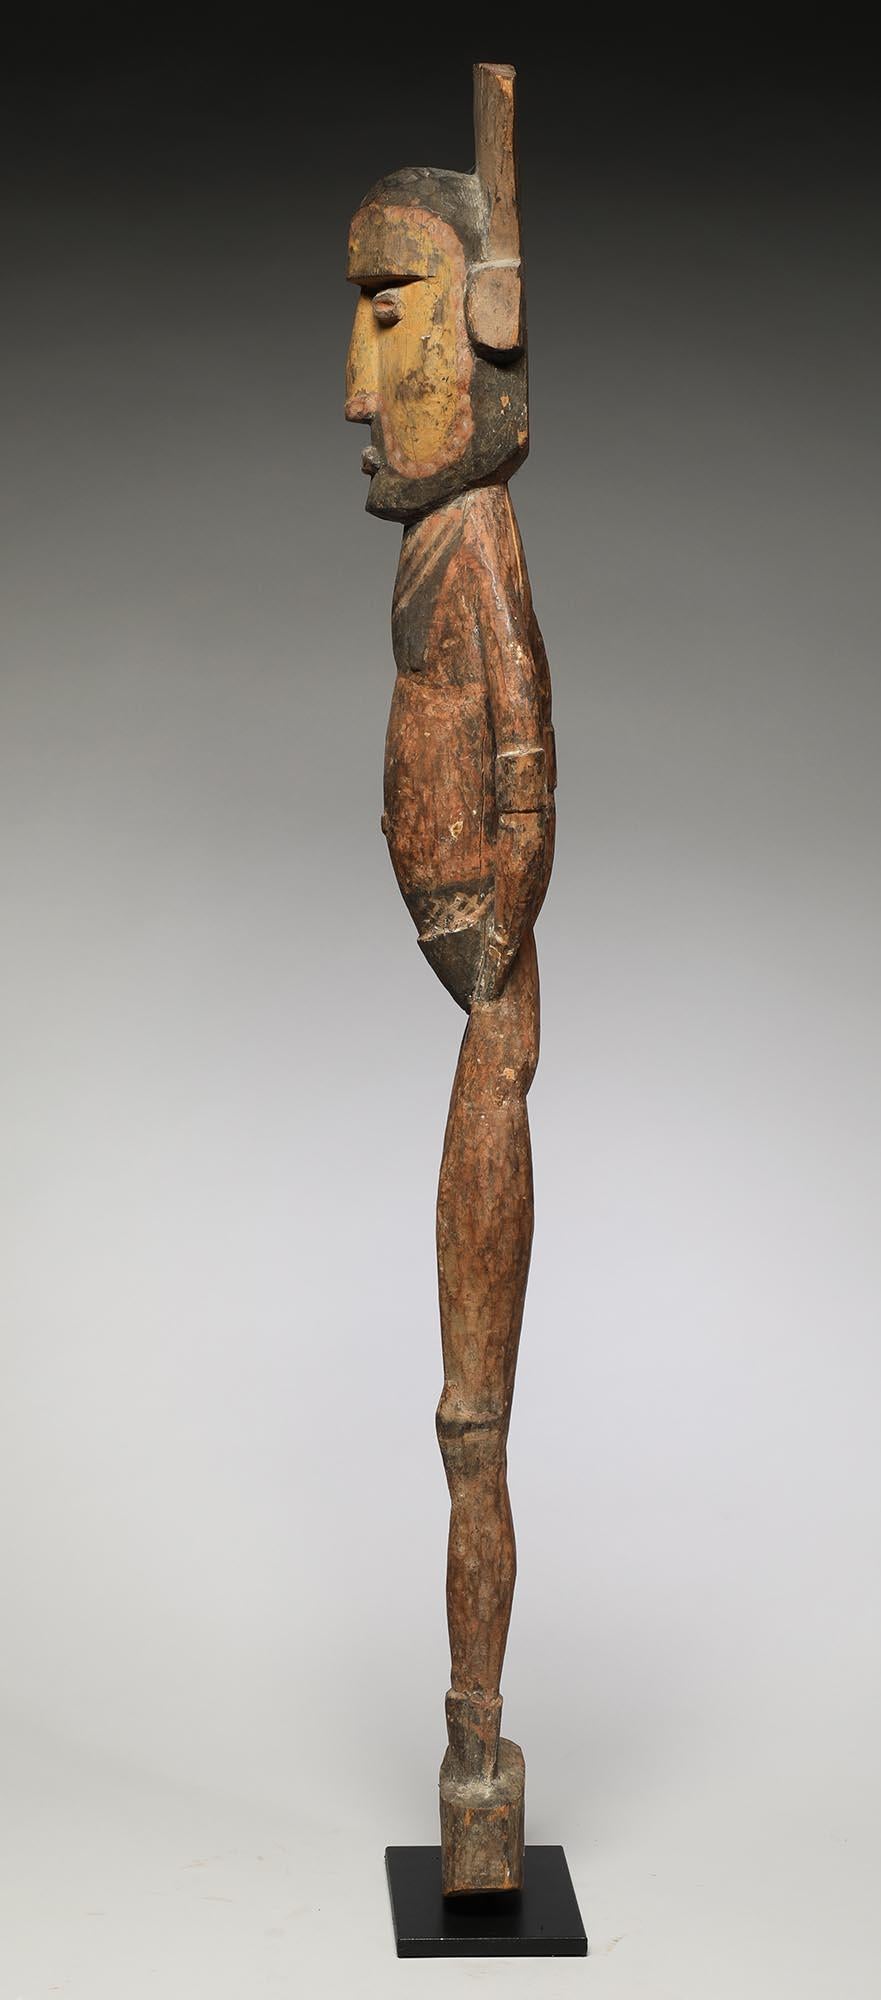 Hand-Carved Tall Elegant Maprik Standing Wood Figure from Papua New Guinea, Mid-20th Century